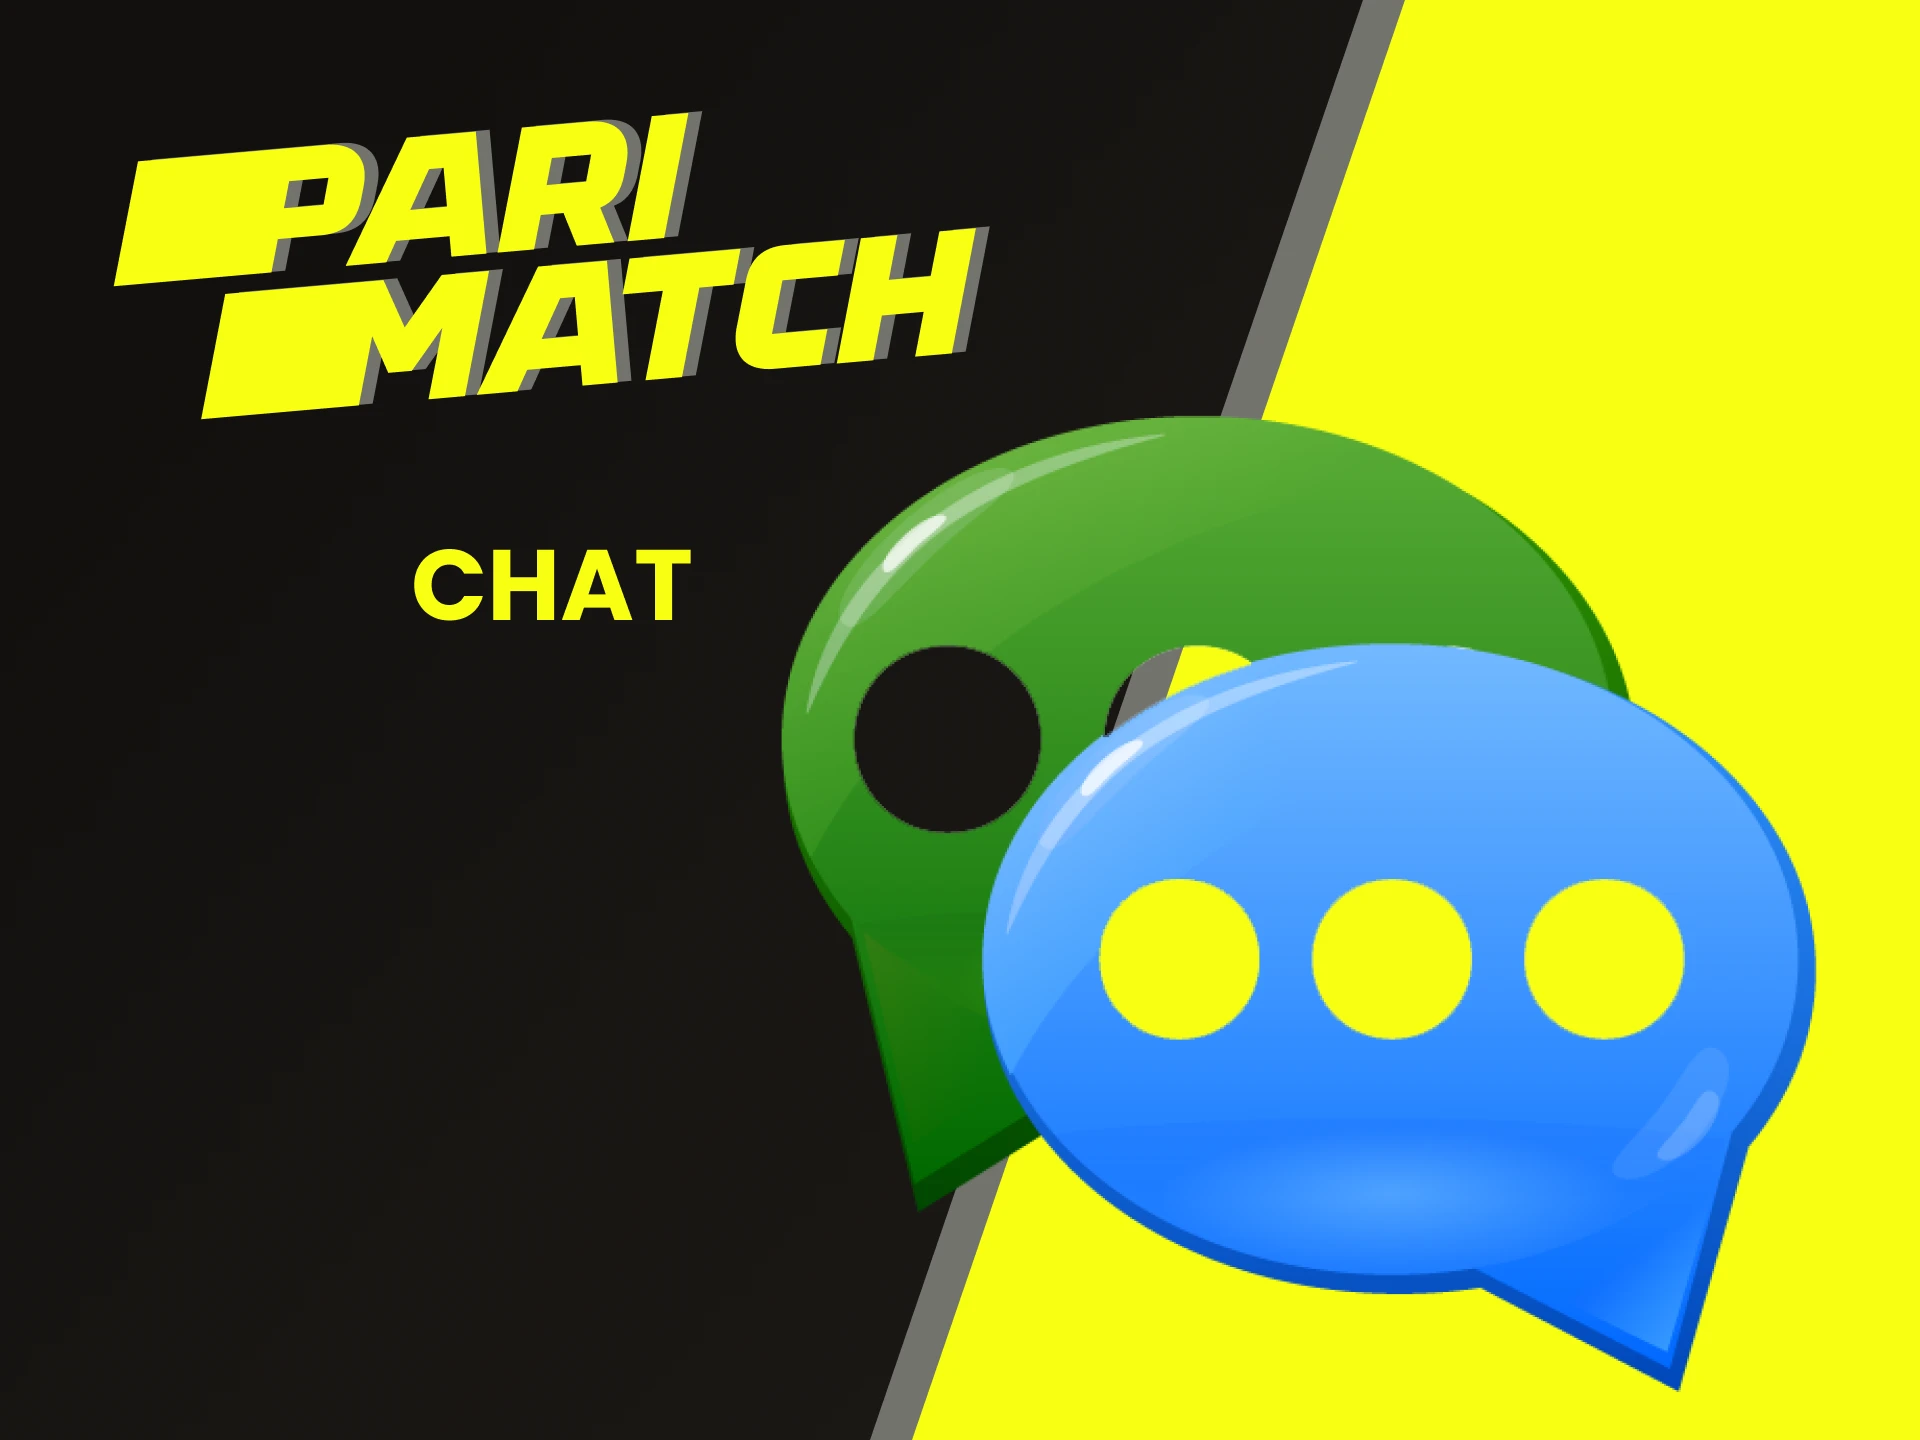 To contact Parimatch technical support, write to them in the chat.